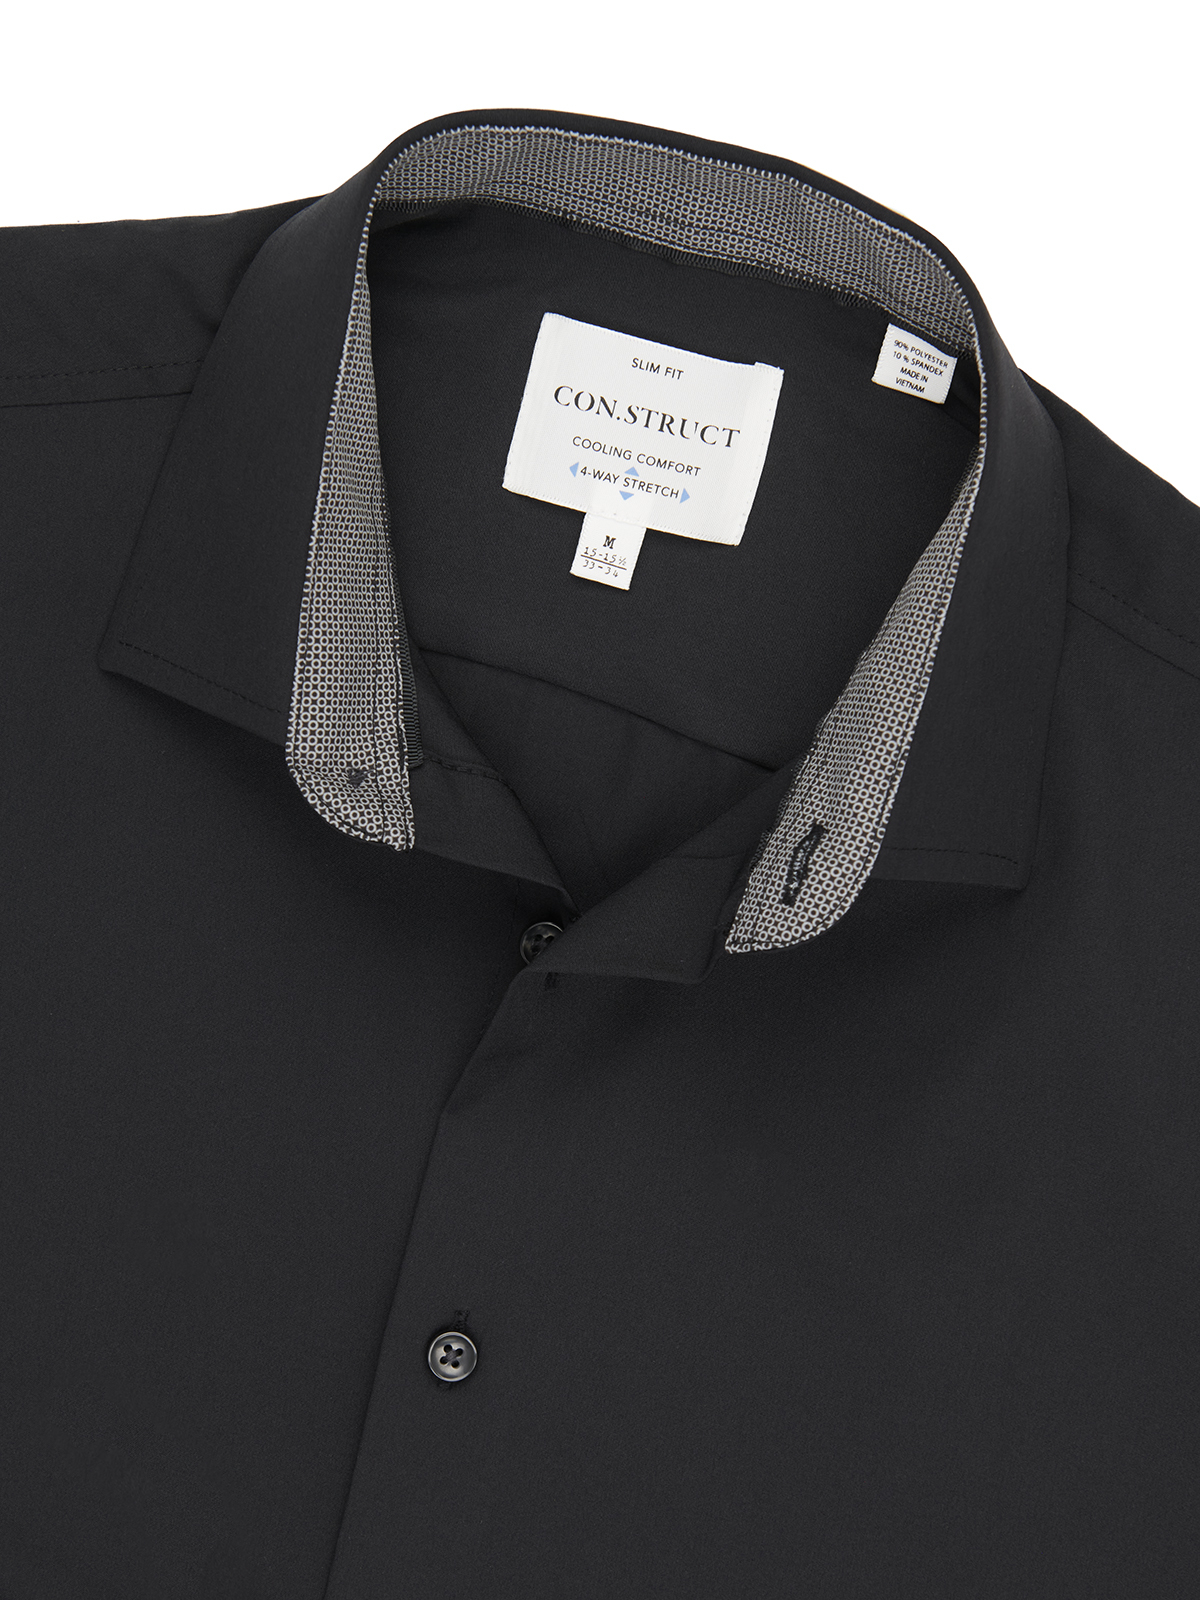 Solid Cooling Performance Stretch Dress Shirt